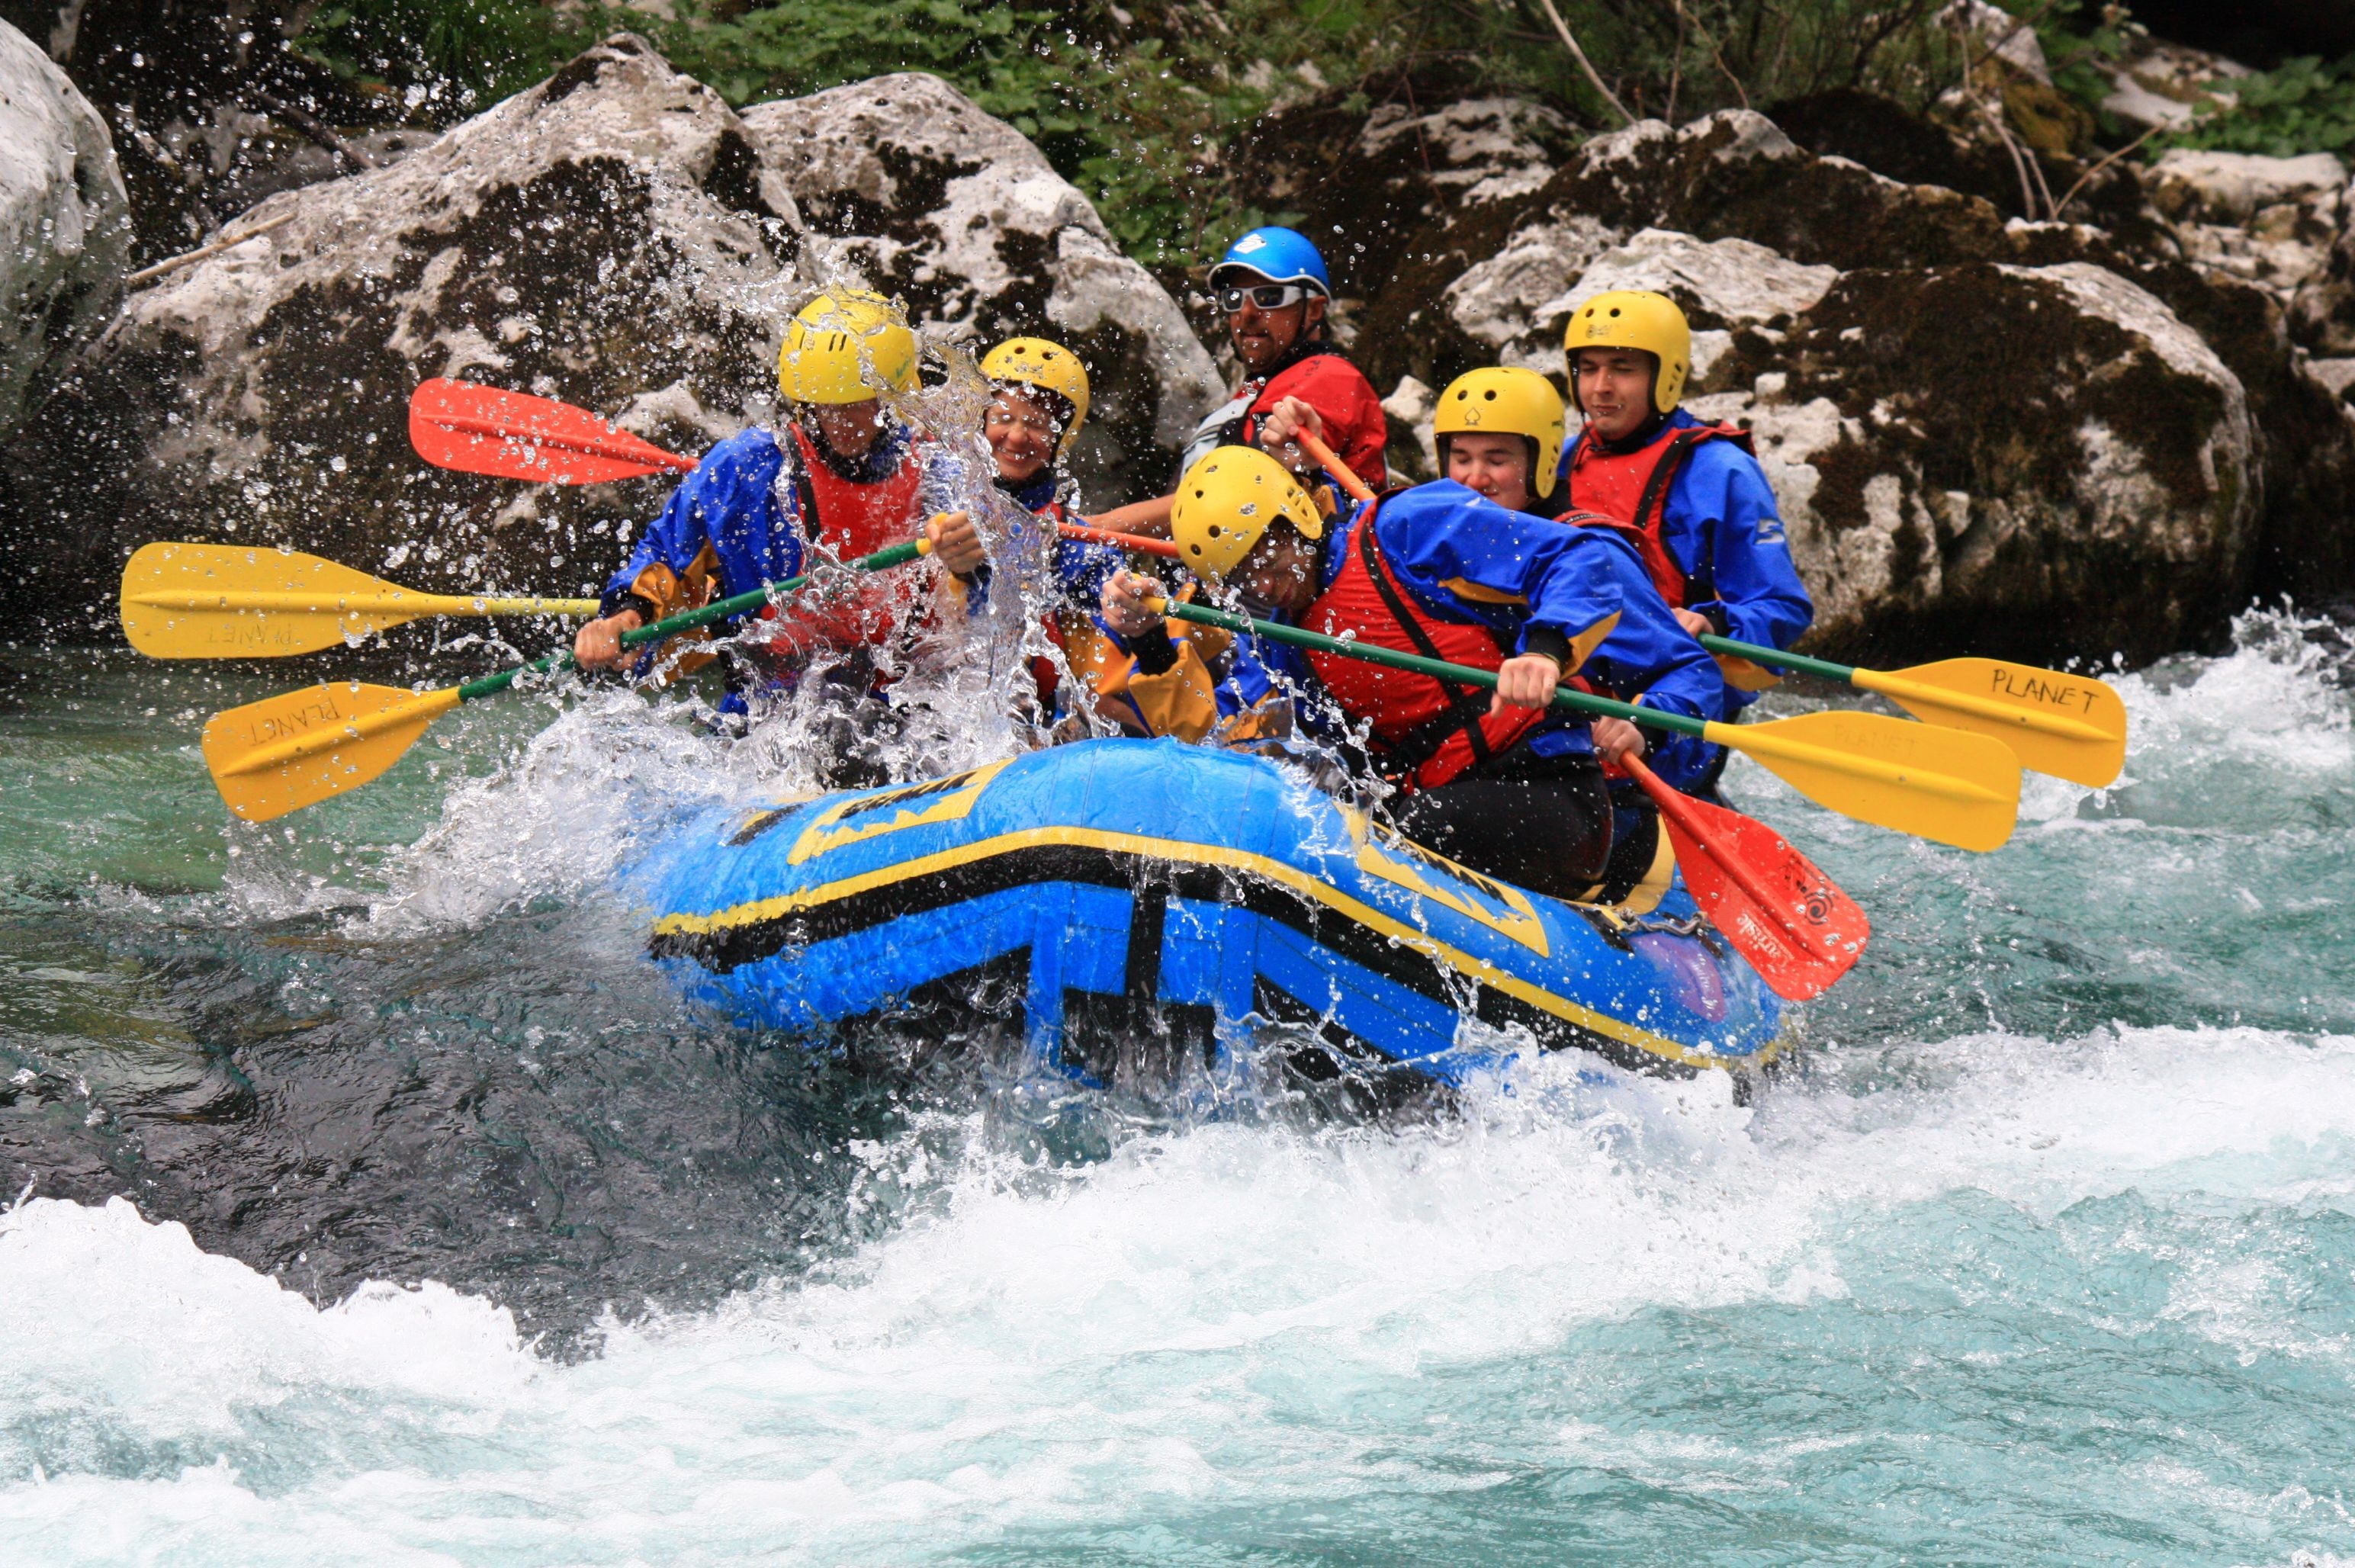 Rafting: An adventure water sport, Moving over the river rapids. 3090x2060 HD Wallpaper.